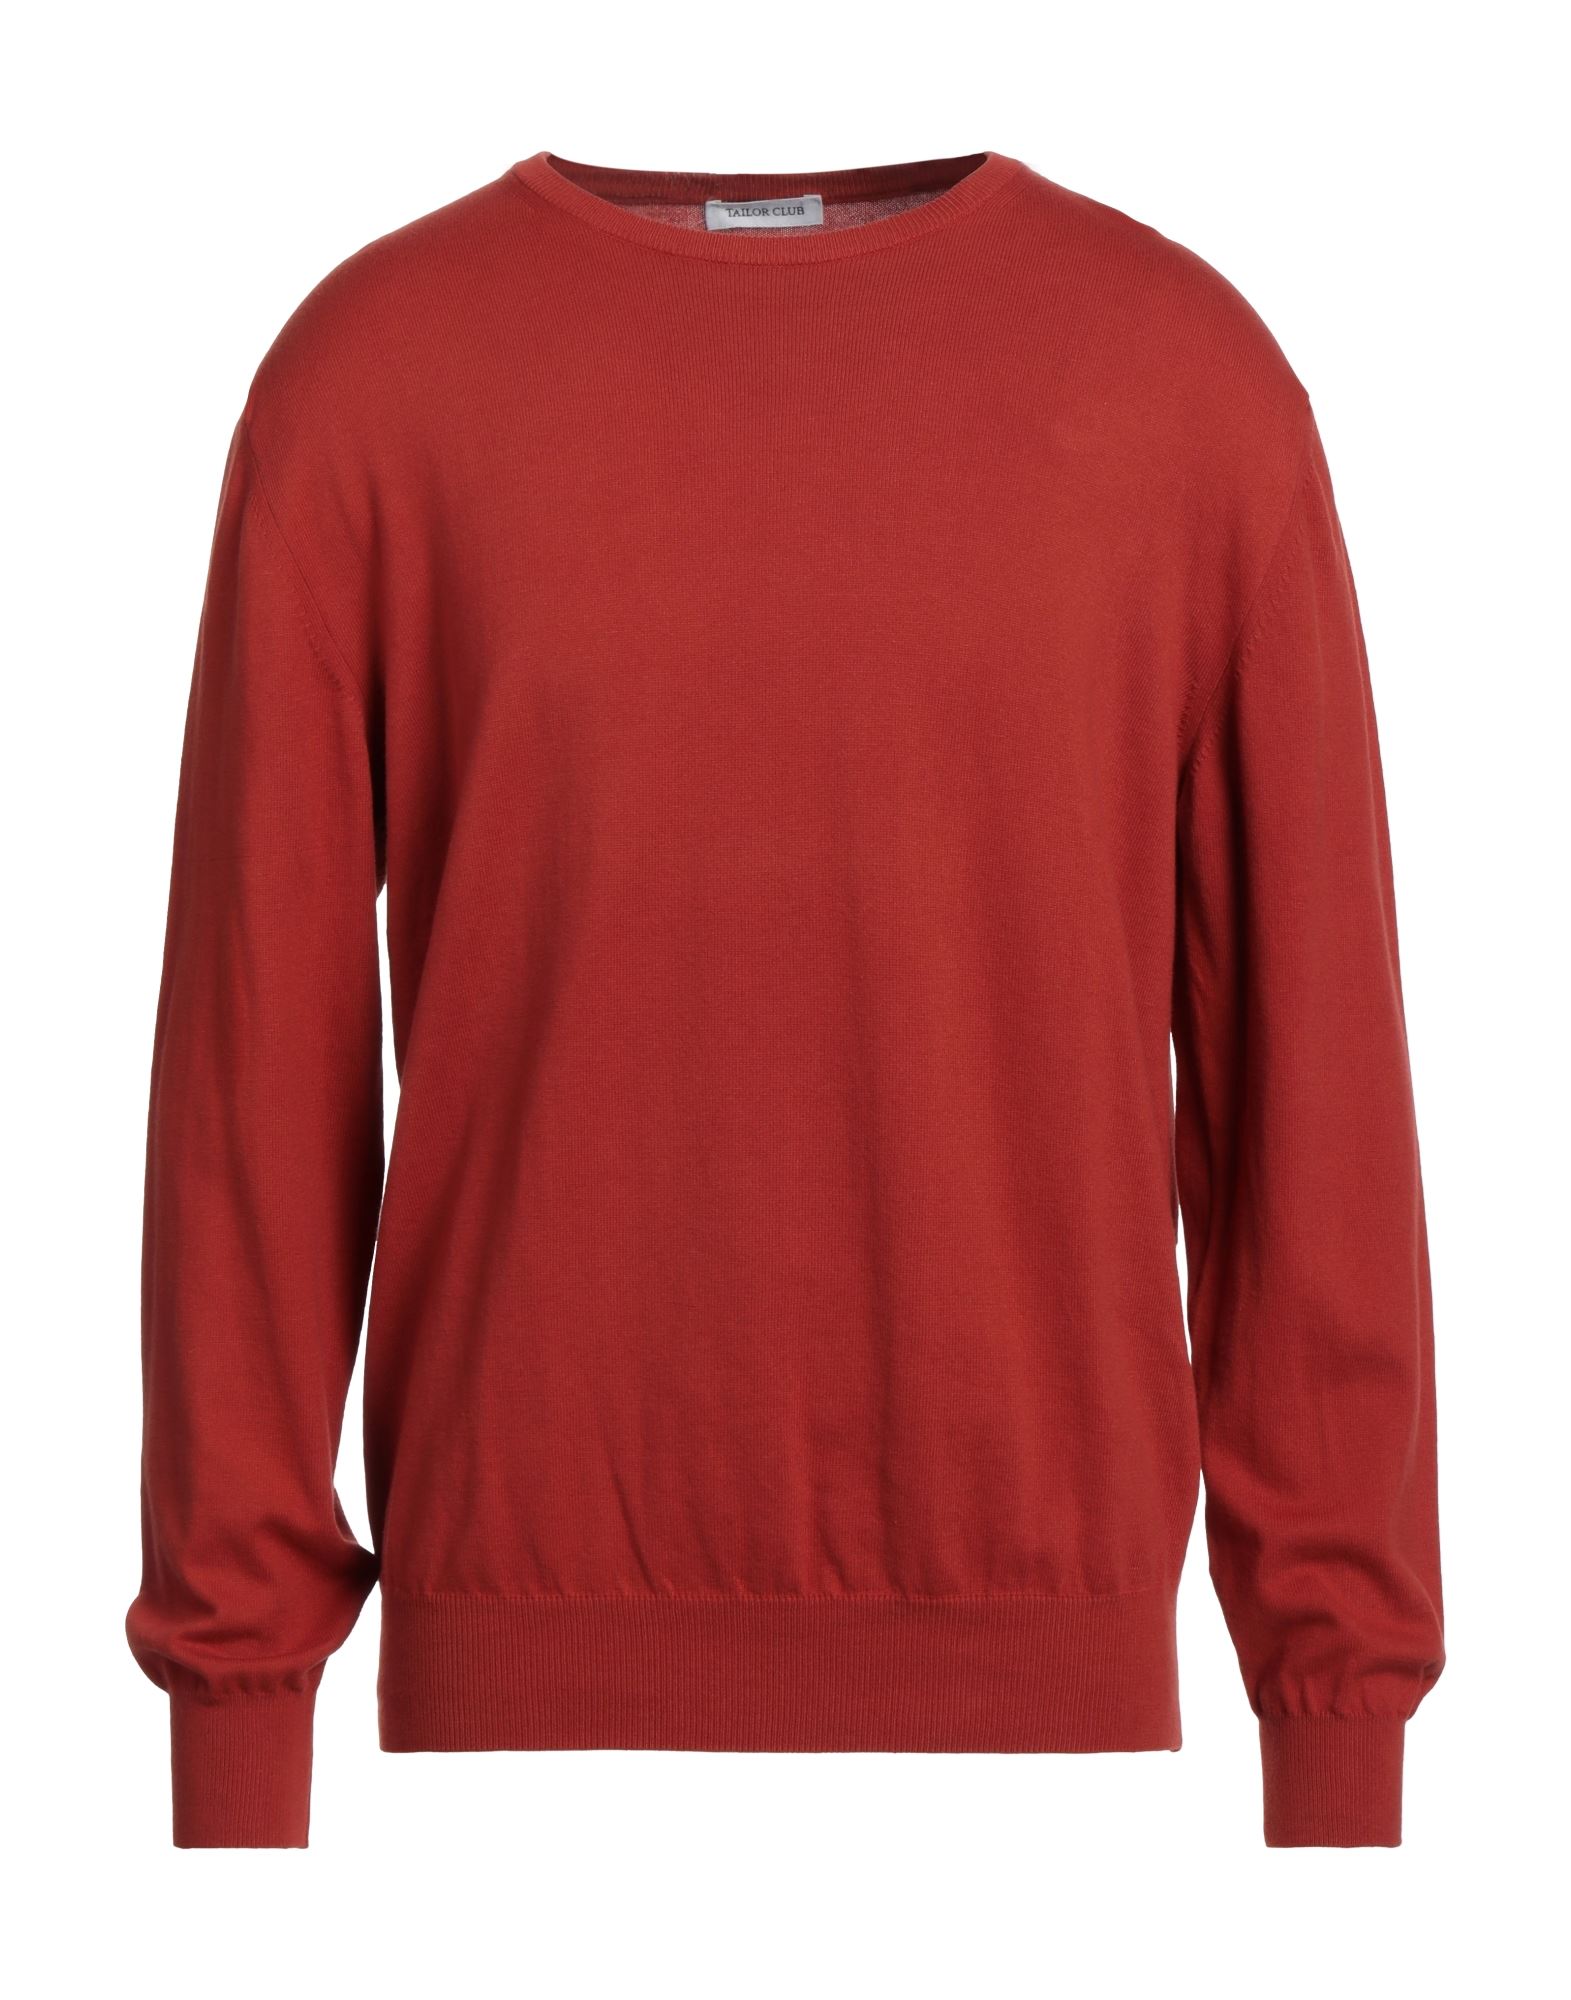 Tailor Club Sweaters In Red